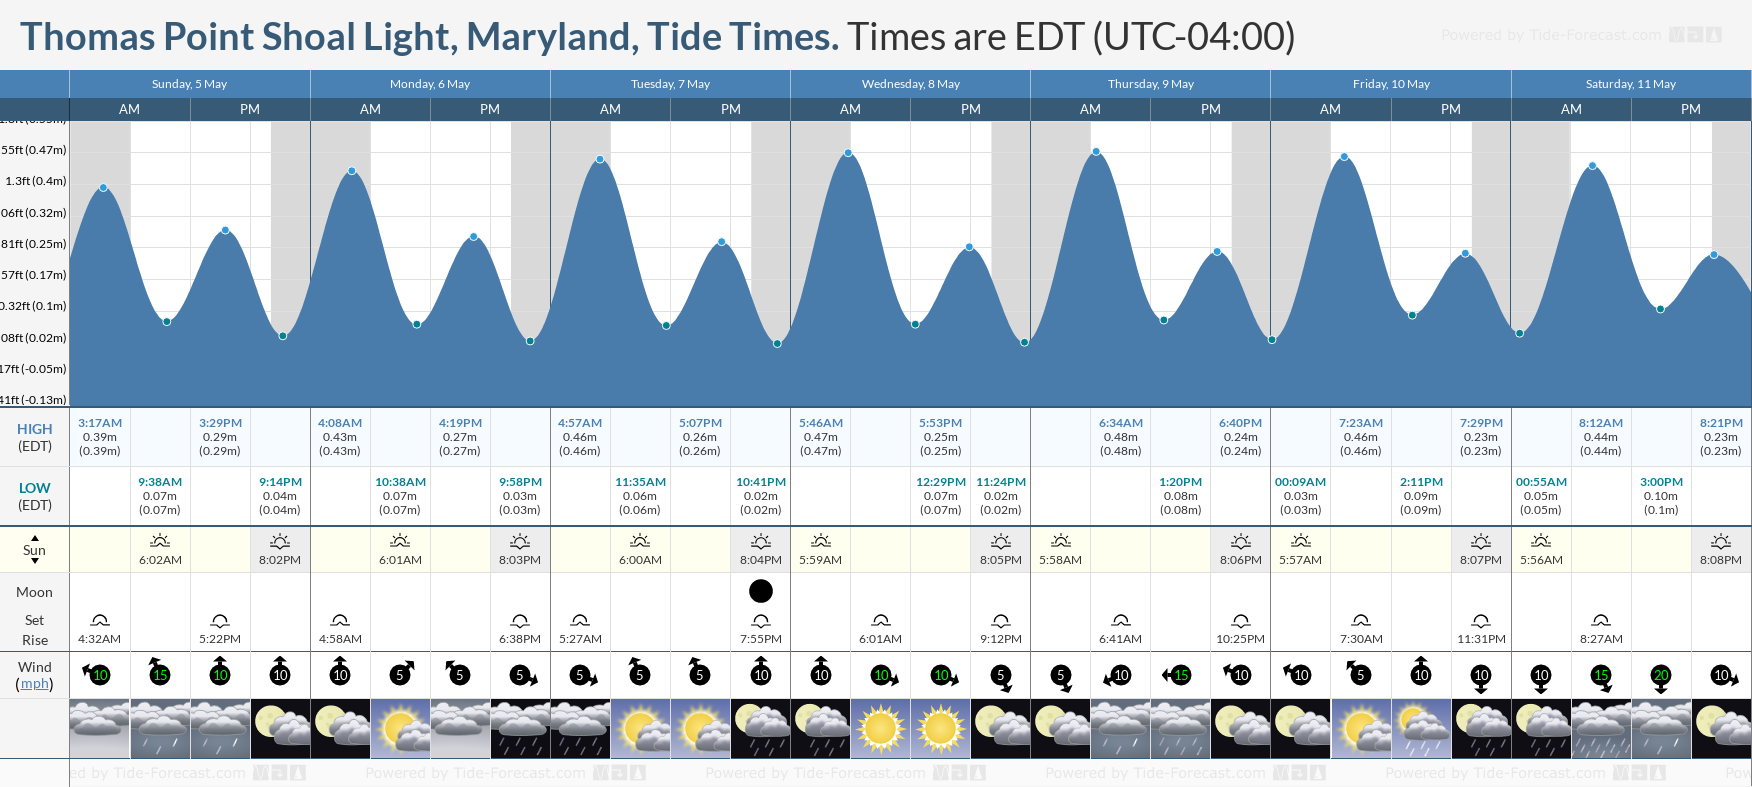 Thomas Point Shoal Light, Maryland Tide Chart including high and low tide tide times for the next 7 days